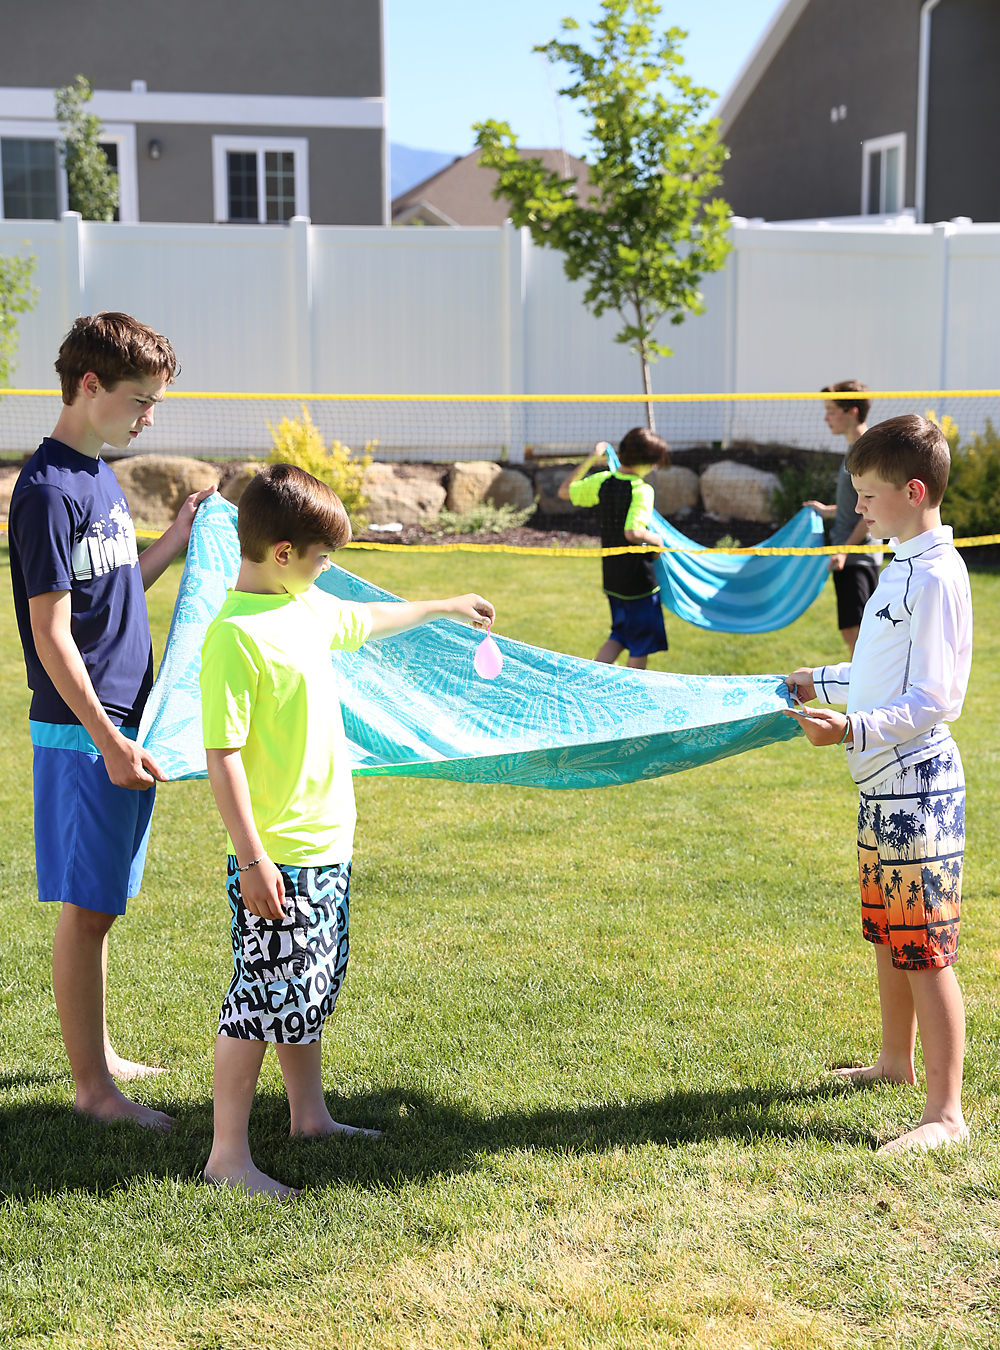 Two boys holding a beach towel while a third boy puts a water balloon on the towel